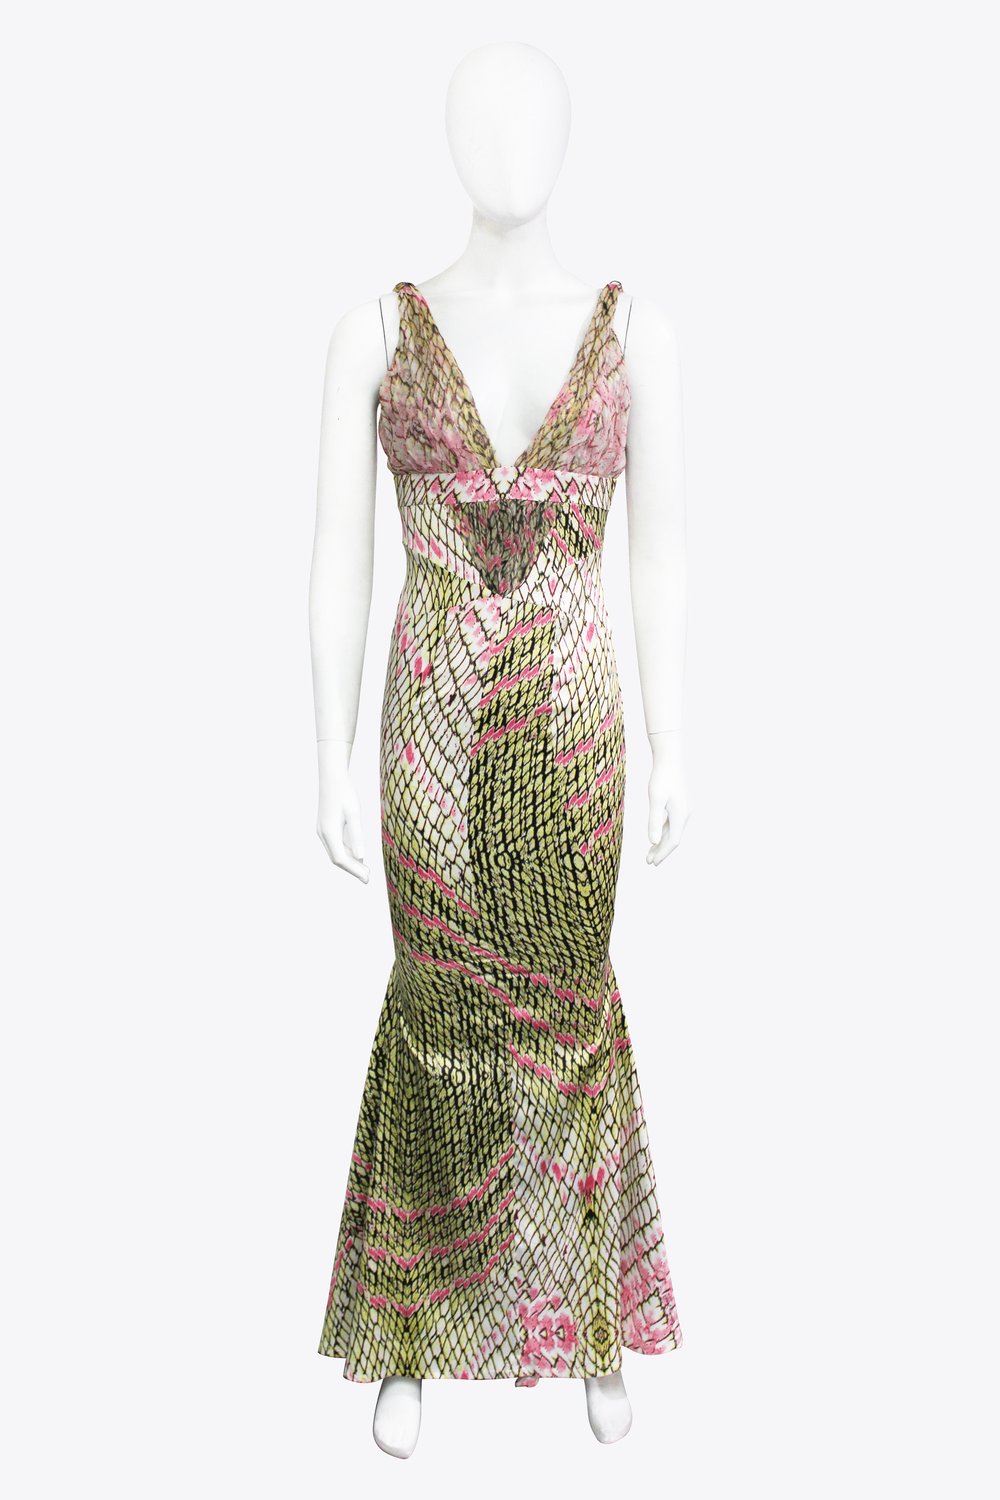 Roberto Cavalli Pink and Green Snake Mermaid Gown